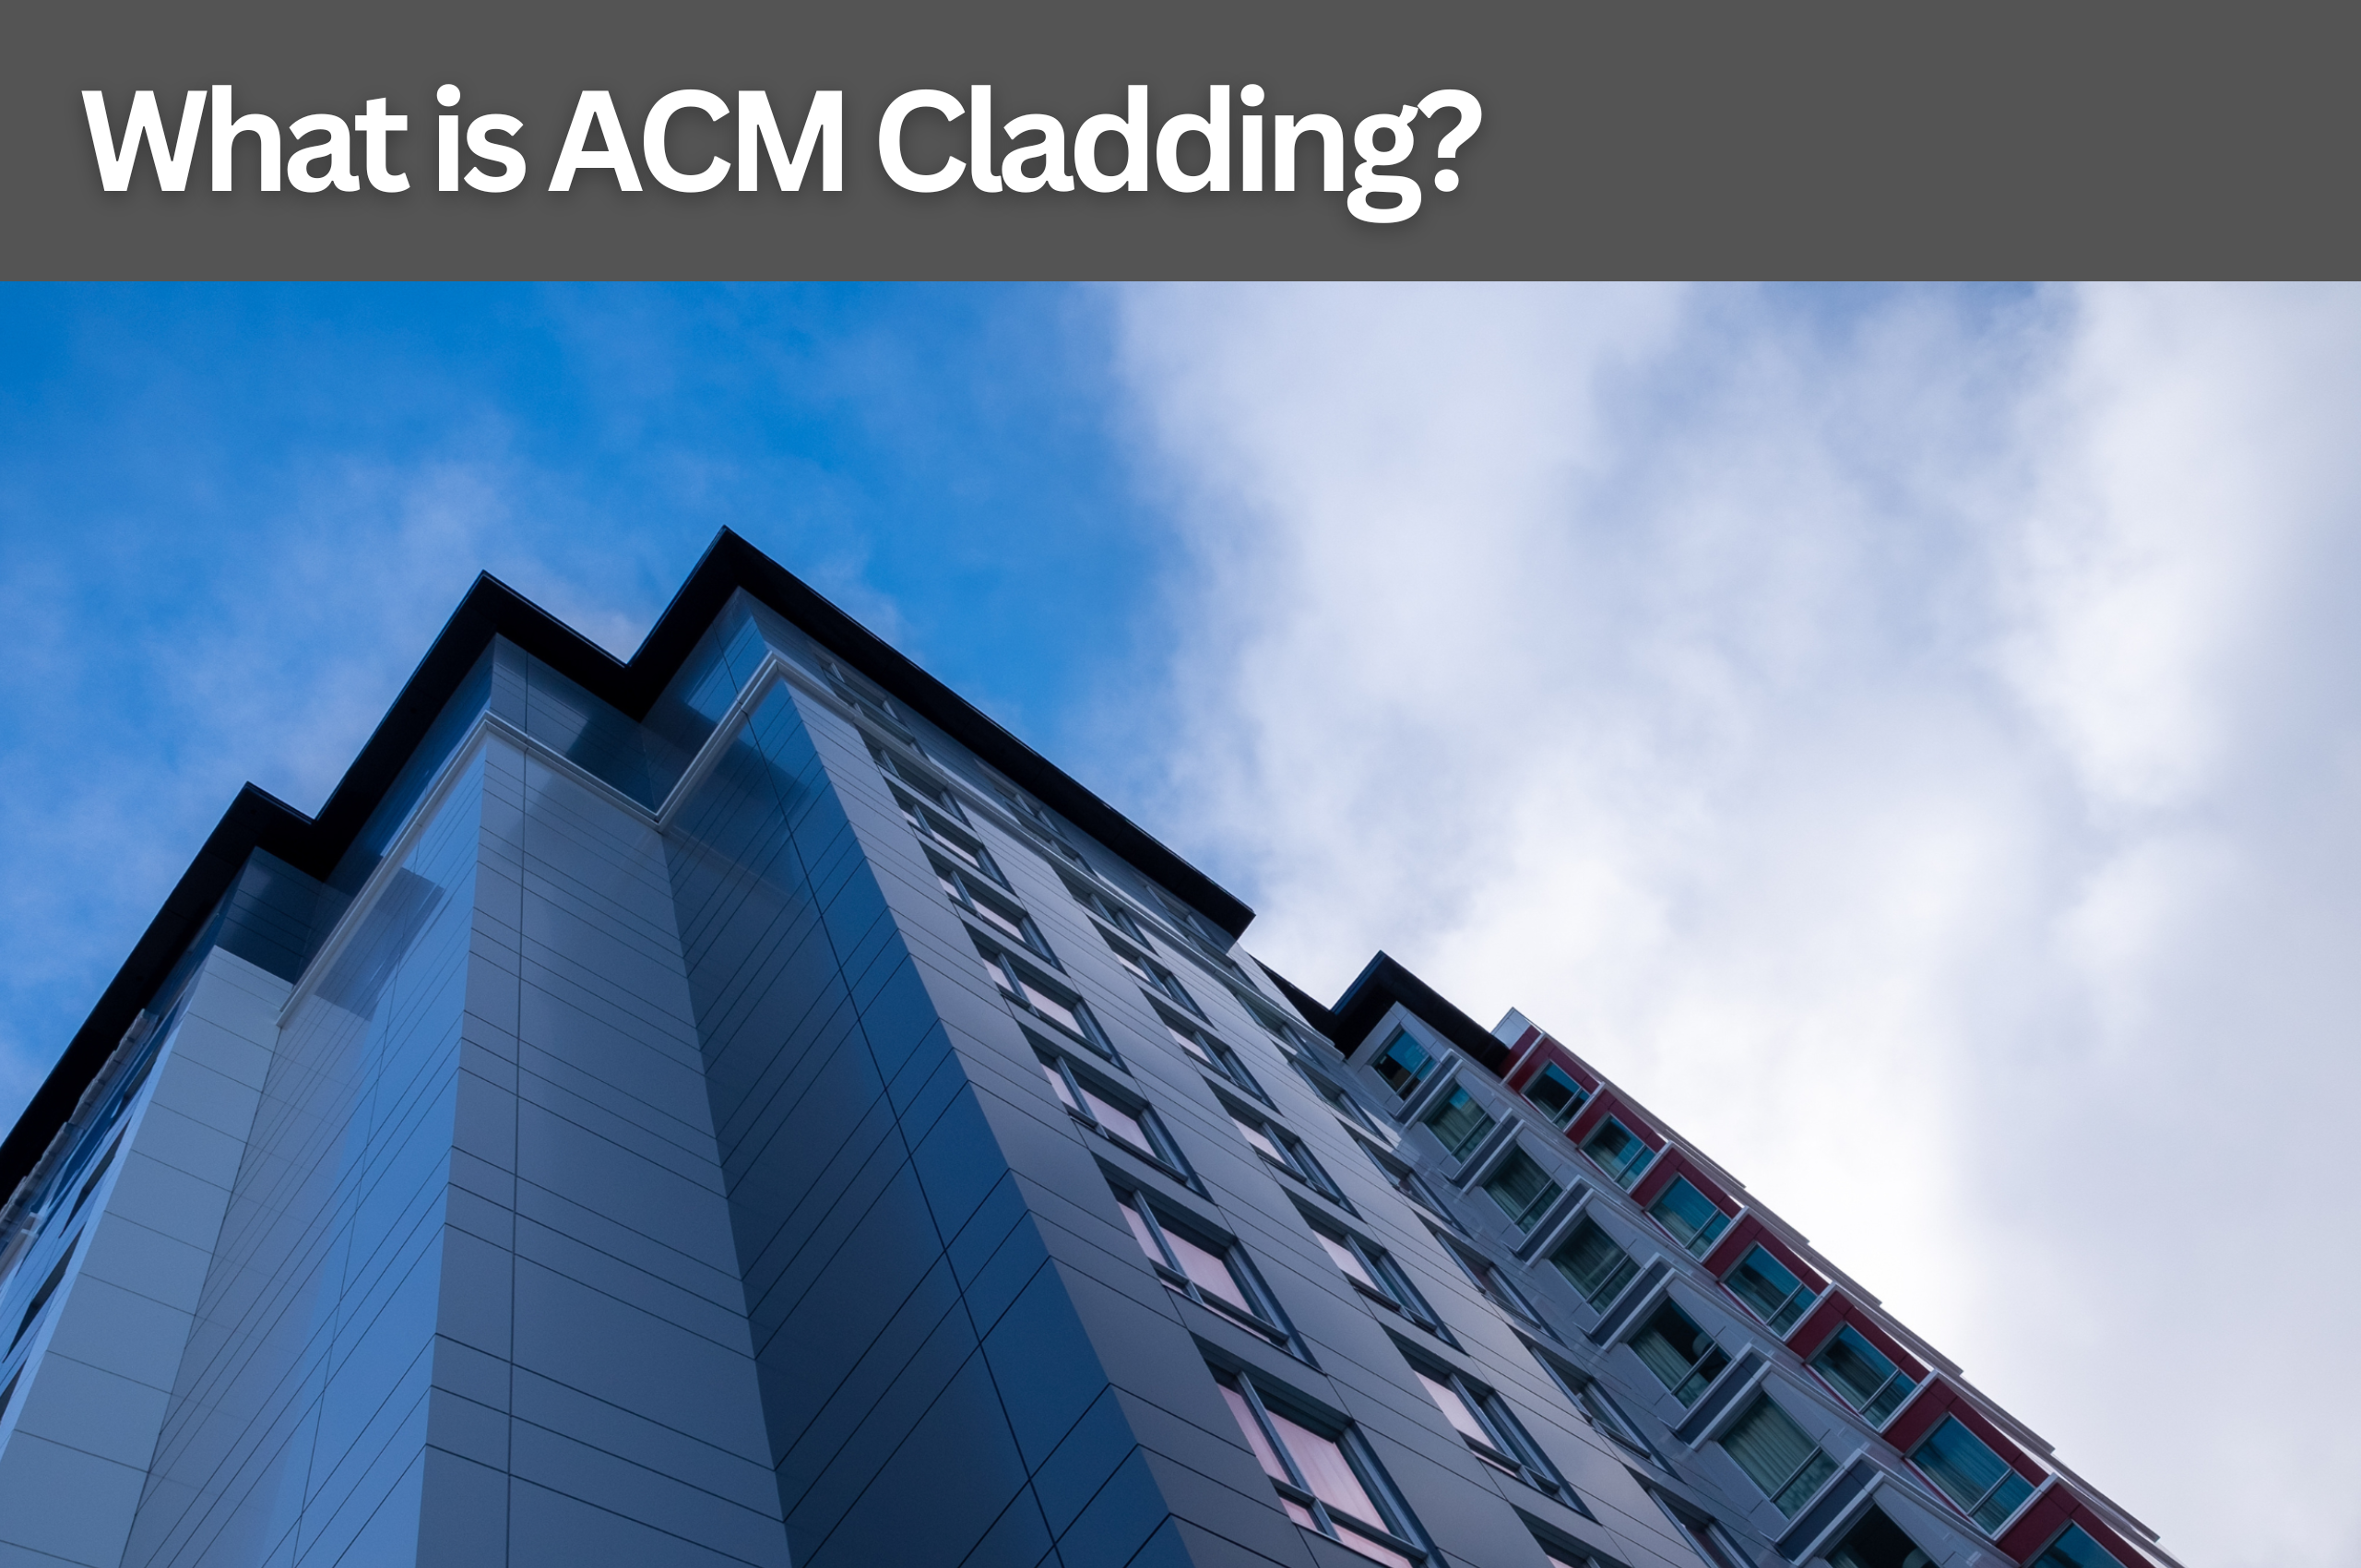 What is ACM Cladding?